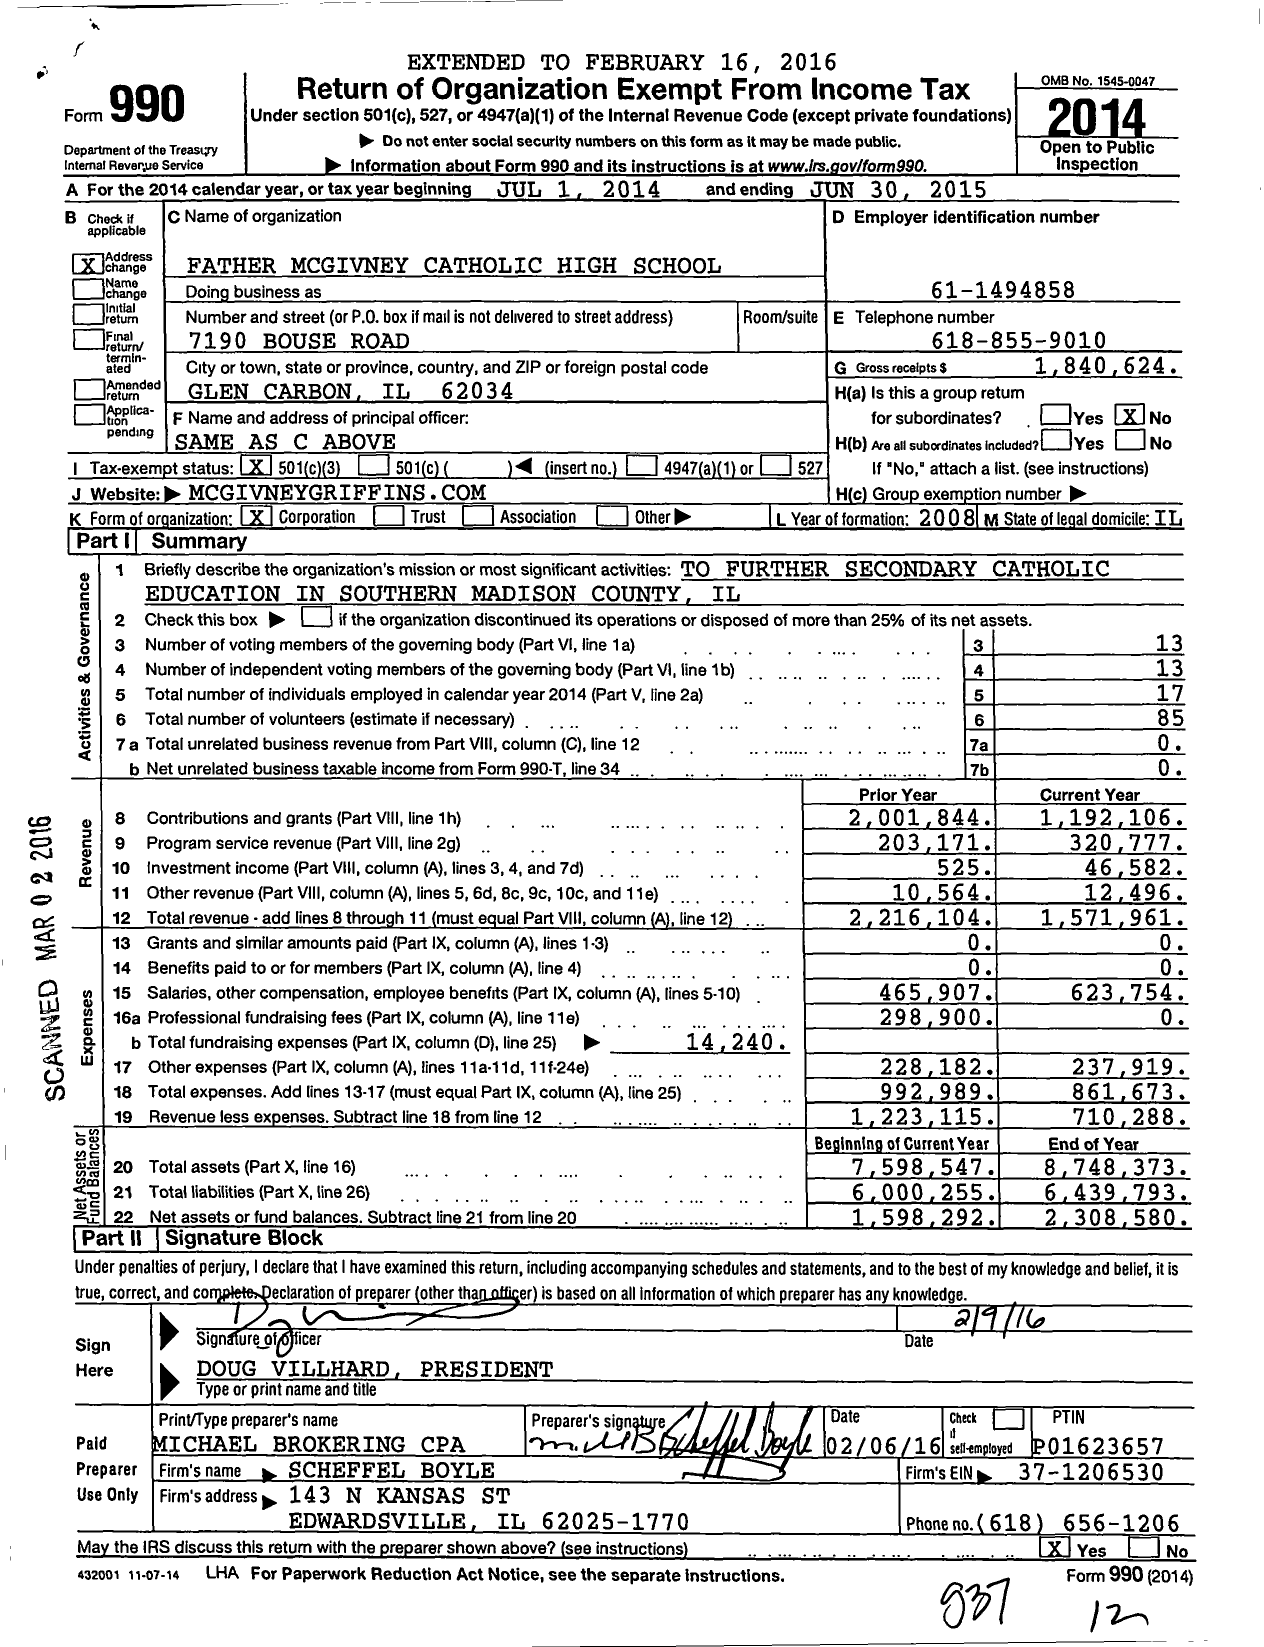 Image of first page of 2014 Form 990 for Father Mcgivney Catholic High School